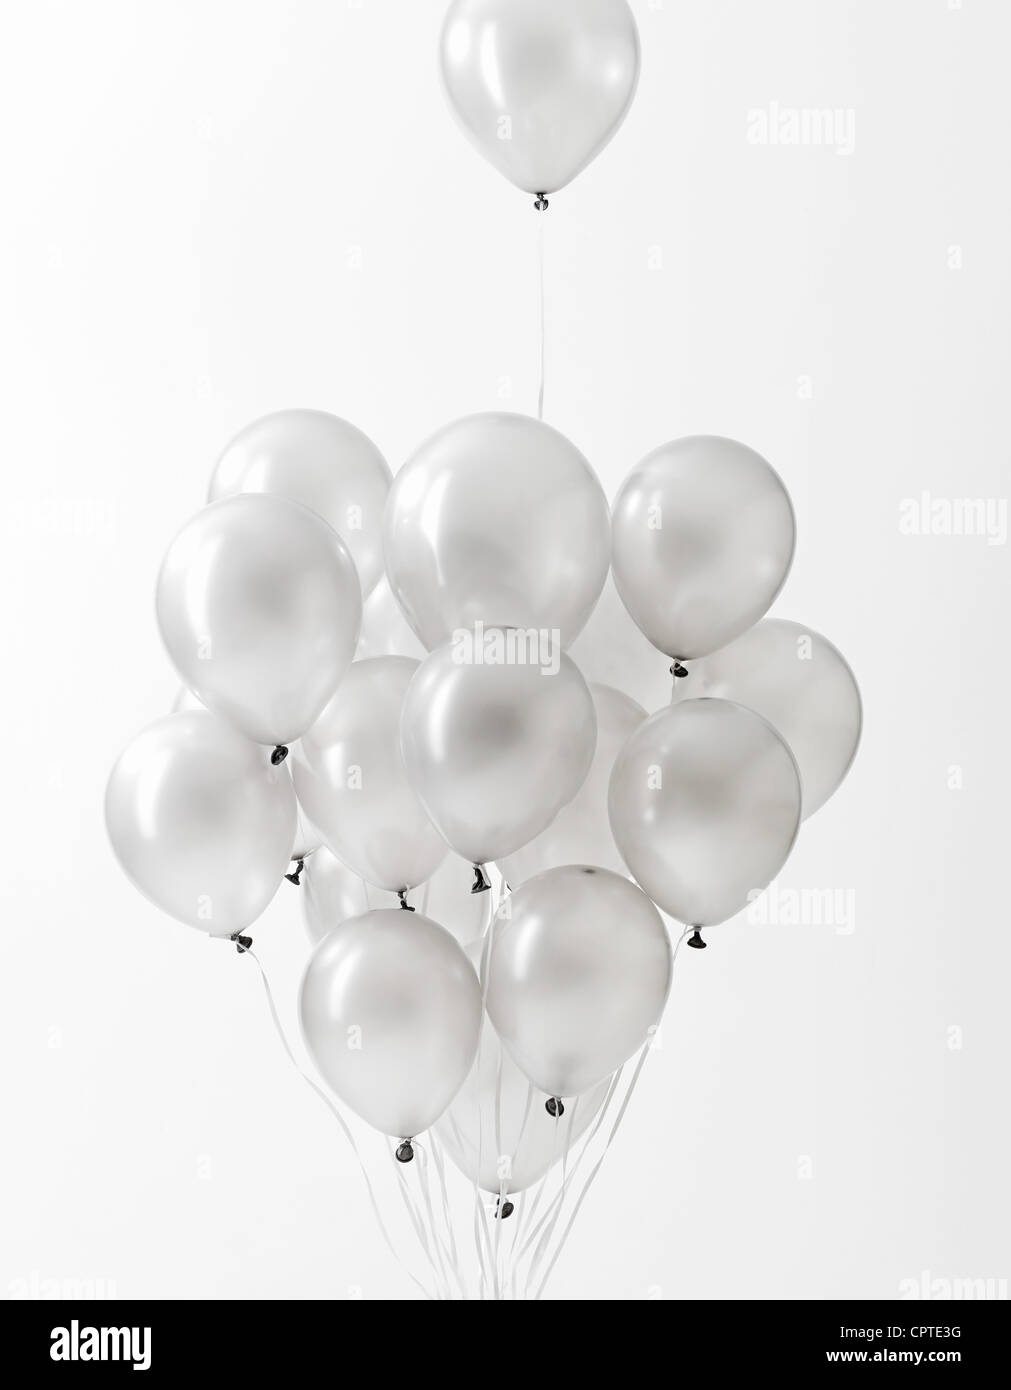 Silver balloons floating against white background Stock Photo